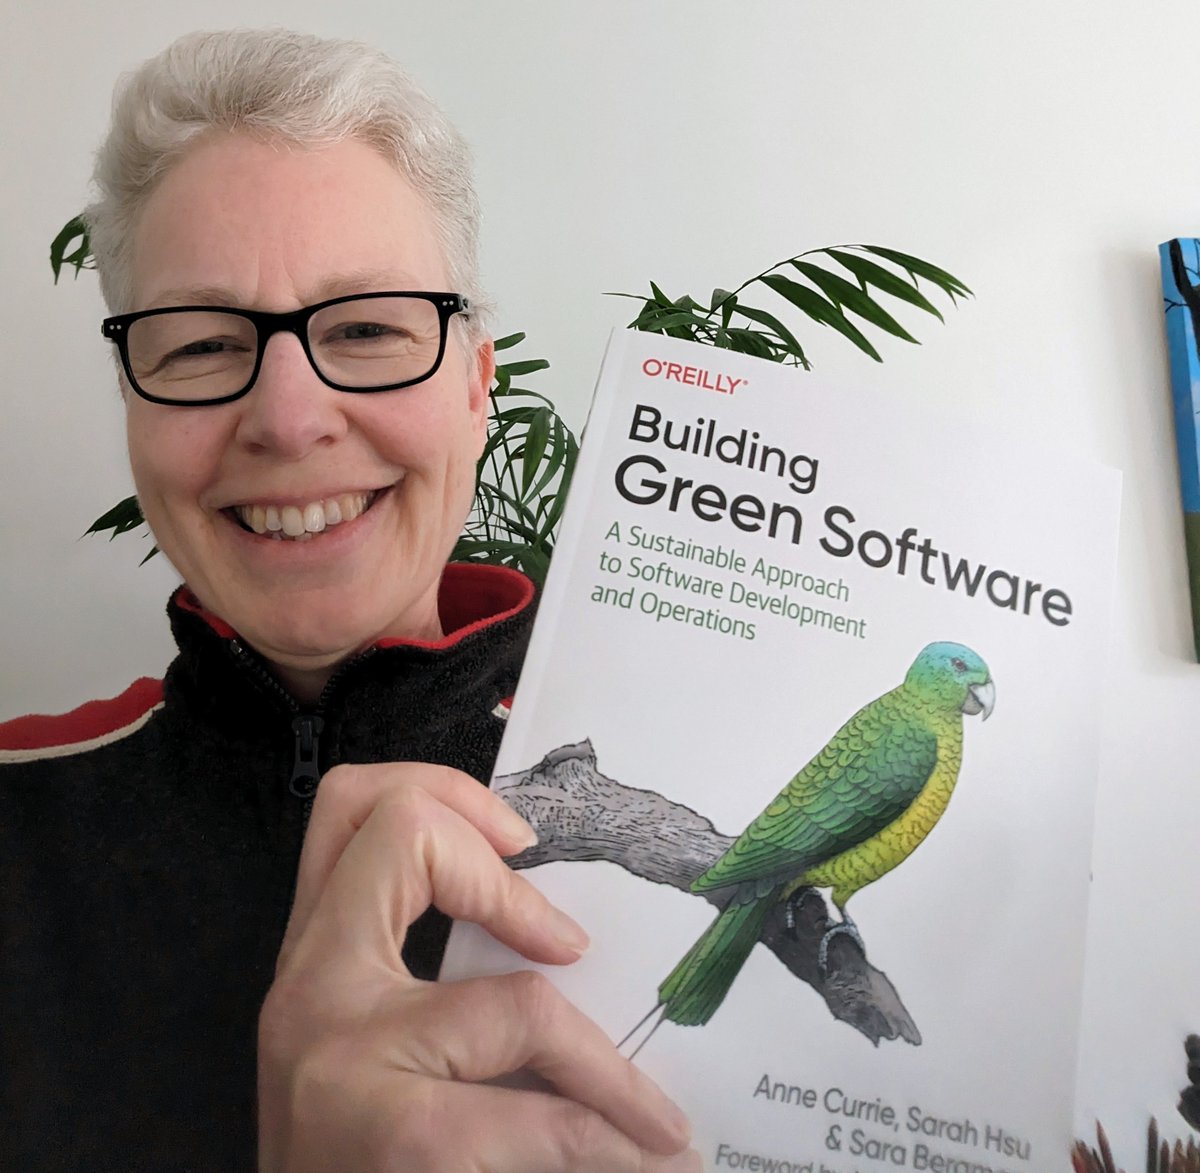 #QConLondon! Hoping for loads of good conversations on green software as well as our track on the future of code efficiency! Plus all :three authors will be signing Building Green Software tomorrow in the reception area at 2:25